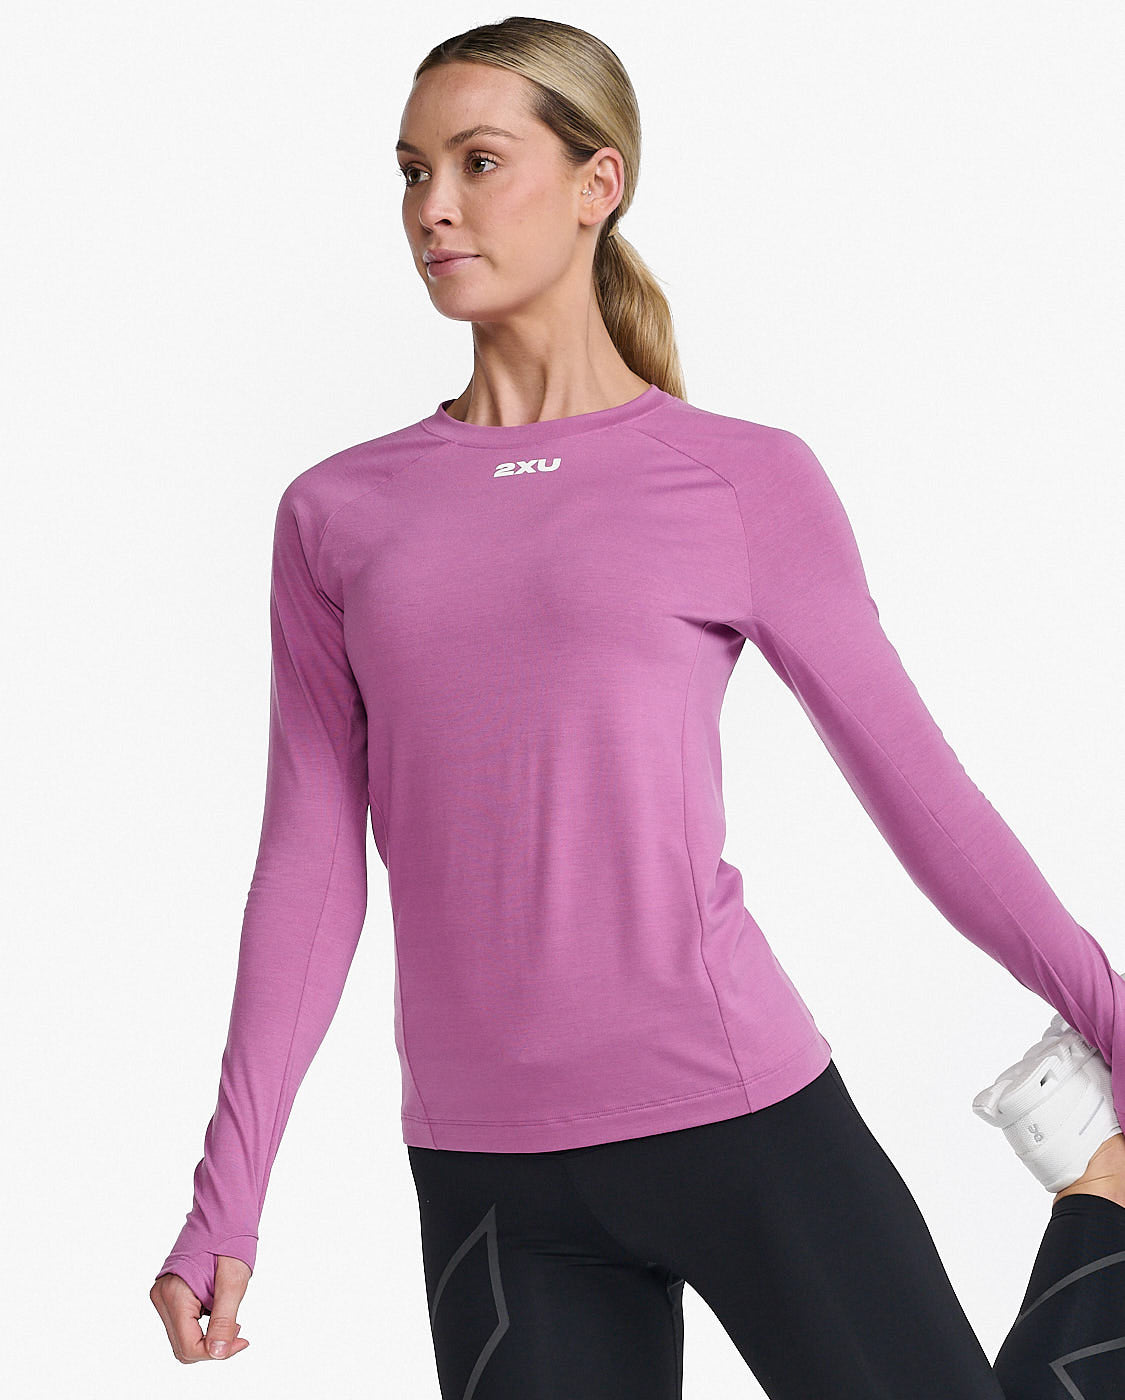 Ignition Compression Long Sleeve – 2XU